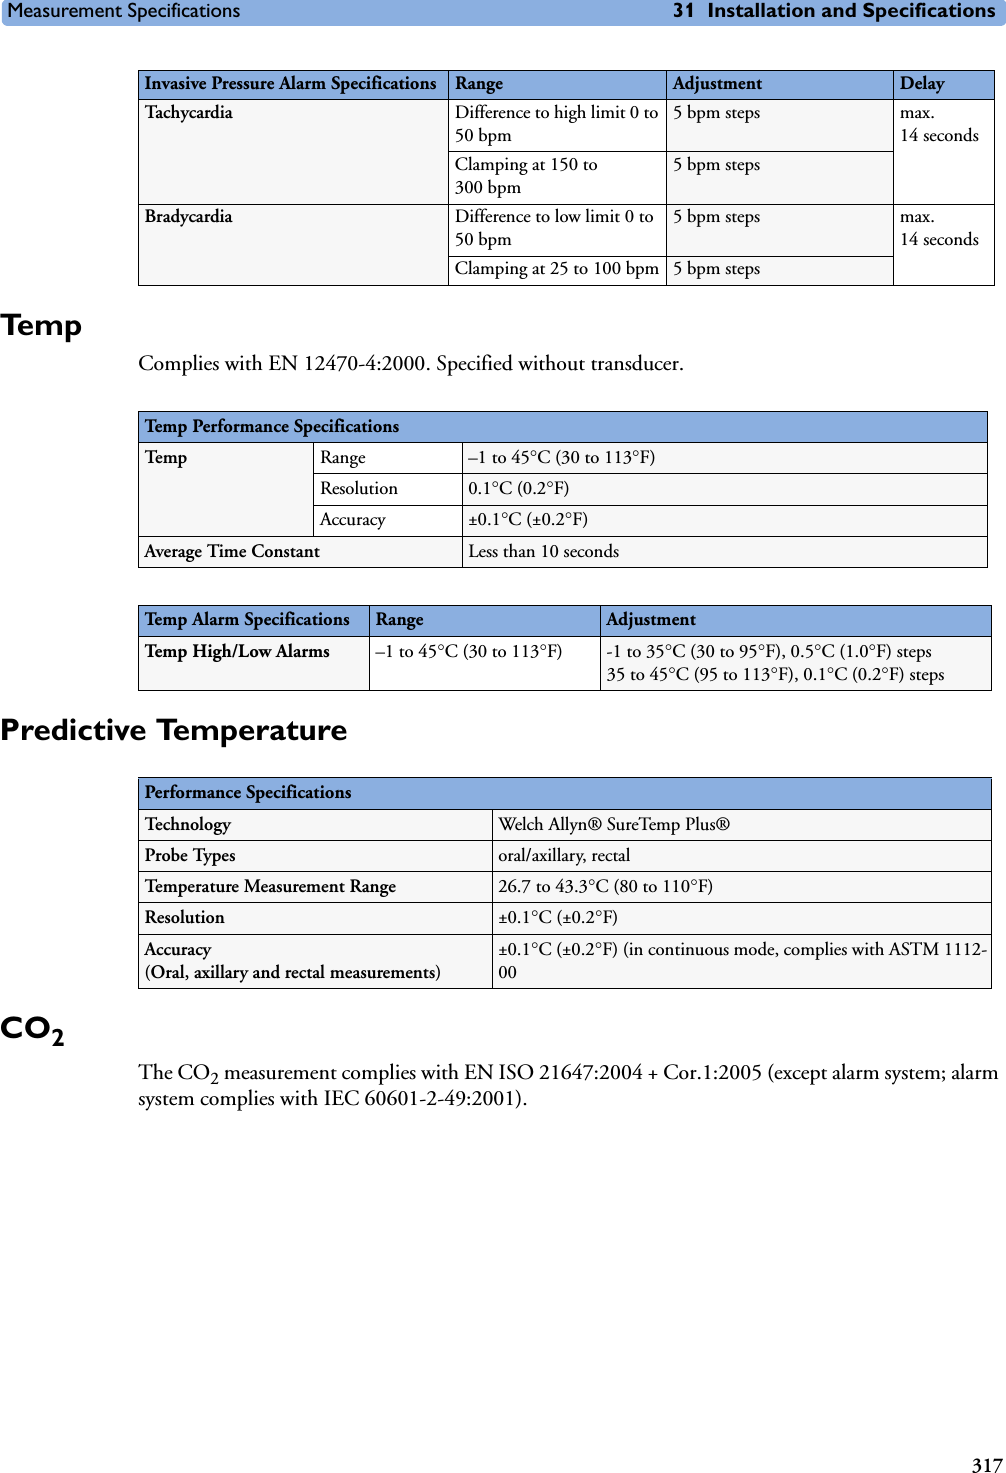 Measurement Specifications 31 Installation and Specifications317Te m p  Complies with EN 12470-4:2000. Specified without transducer.Predictive TemperatureCO2The CO2 measurement complies with EN ISO 21647:2004 + Cor.1:2005 (except alarm system; alarm system complies with IEC 60601-2-49:2001).Tachycardia Difference to high limit 0 to 50 bpm5 bpm steps max. 14 secondsClamping at 150 to 300 bpm5 bpm stepsBradycardia Difference to low limit 0 to 50 bpm5 bpm steps max. 14 secondsClamping at 25 to 100 bpm 5 bpm stepsInvasive Pressure Alarm Specifications Range Adjustment DelayTemp Performance SpecificationsTe m p Range –1 to 45C (30 to 113F)Resolution 0.1C (0.2F)Accuracy ±0.1C (±0.2F)Average Time Constant Less than 10 secondsTemp Alarm Specifications Range AdjustmentTemp  H i gh / L ow A l a rm s –1 to 45C (30 to 113F) -1 to 35C (30 to 95F), 0.5C (1.0F) steps35 to 45C (95 to 113F), 0.1C (0.2F) stepsPerformance SpecificationsTe c h n o l o g y Welch Allyn® SureTemp Plus®Probe Types oral/axillary, rectalTemperature Measurement Range 26.7 to 43.3C (80 to 110F)Resolution  ±0.1C (±0.2F)Accuracy (Oral, axillary and rectal measurements)±0.1C (±0.2F) (in continuous mode, complies with ASTM 1112-00